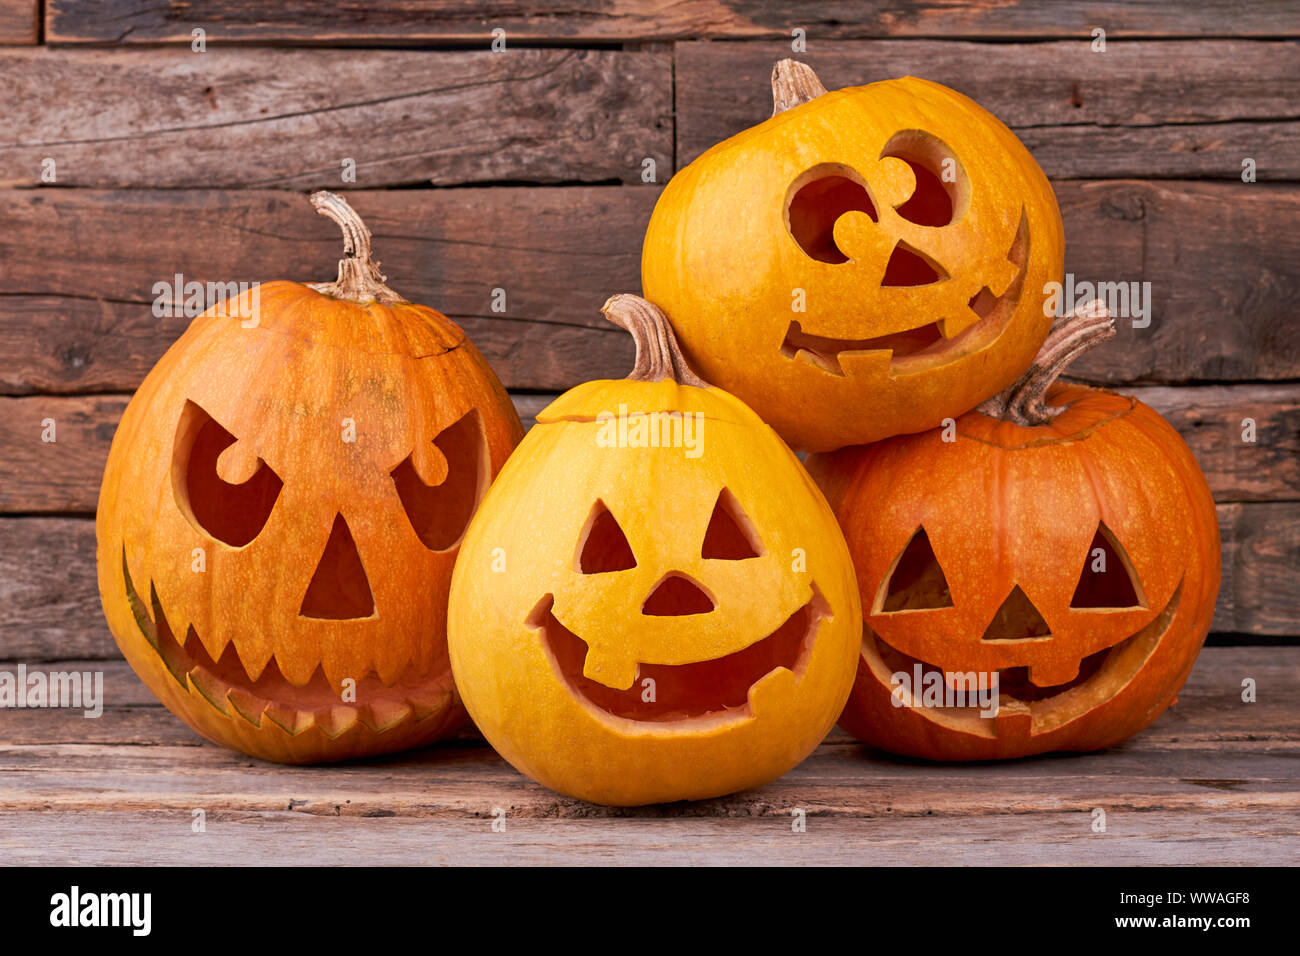 Funny Halloween pumpkins on wooden background. Stock Photo